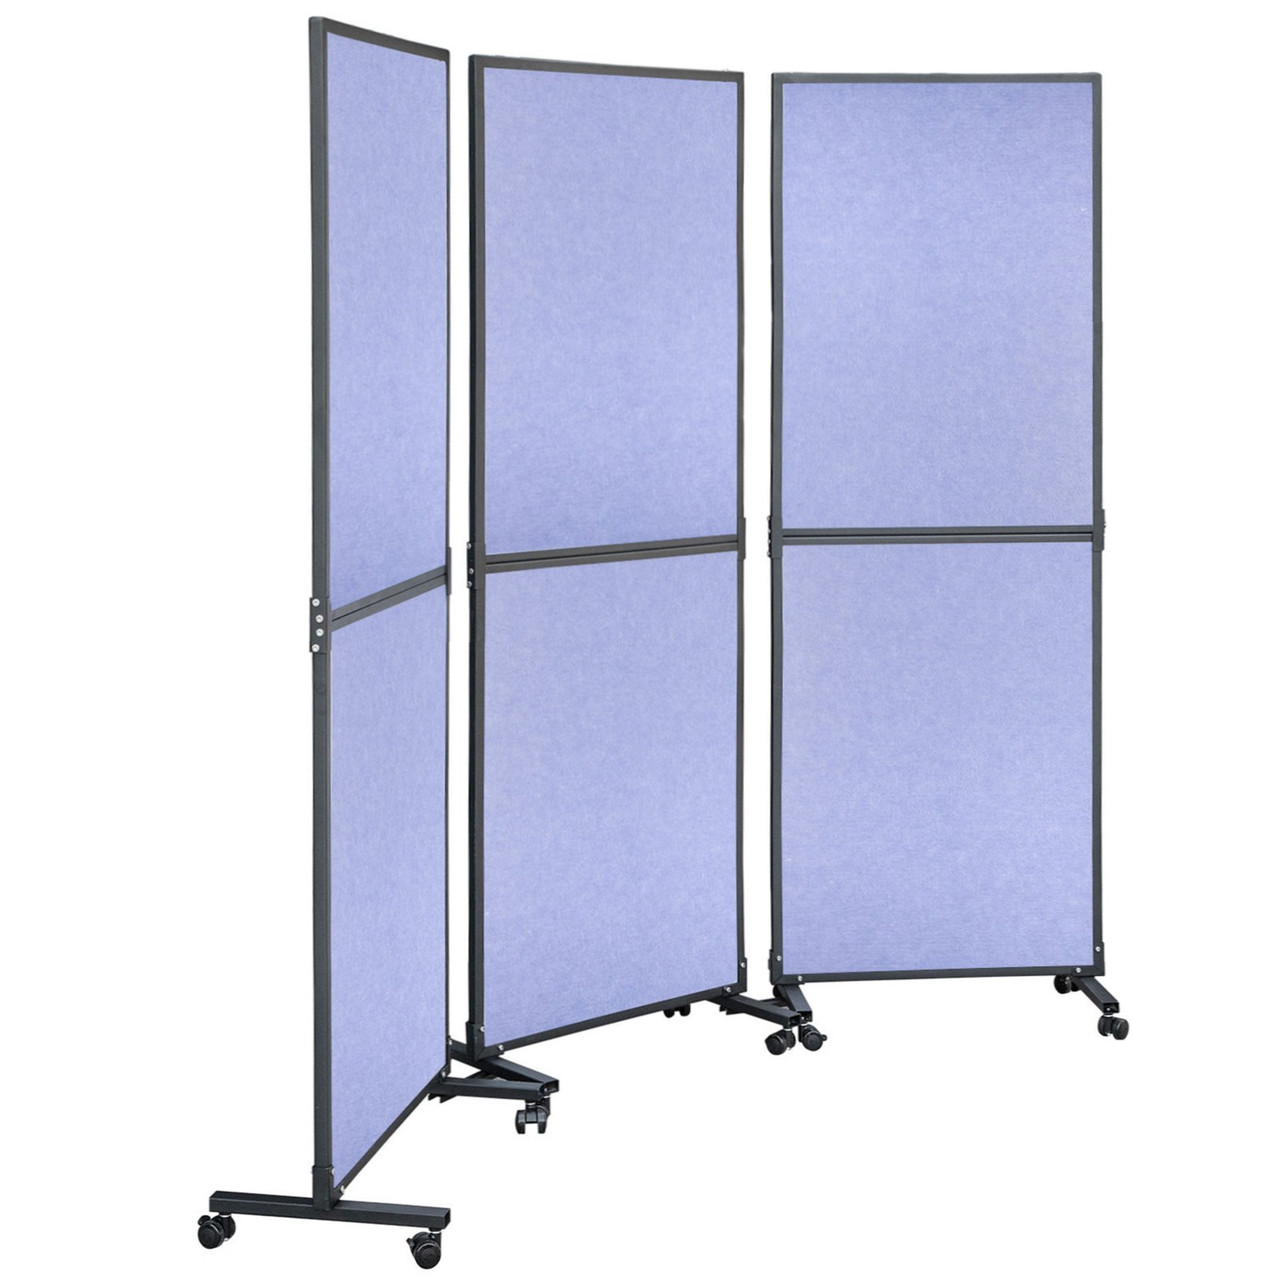 Acoustic Room Divider 72" x 66" Office Partition Panel 3 Pack Office Divider Wall Steel Blue Office Dividers Partition Wall Polyester & 45 Steel